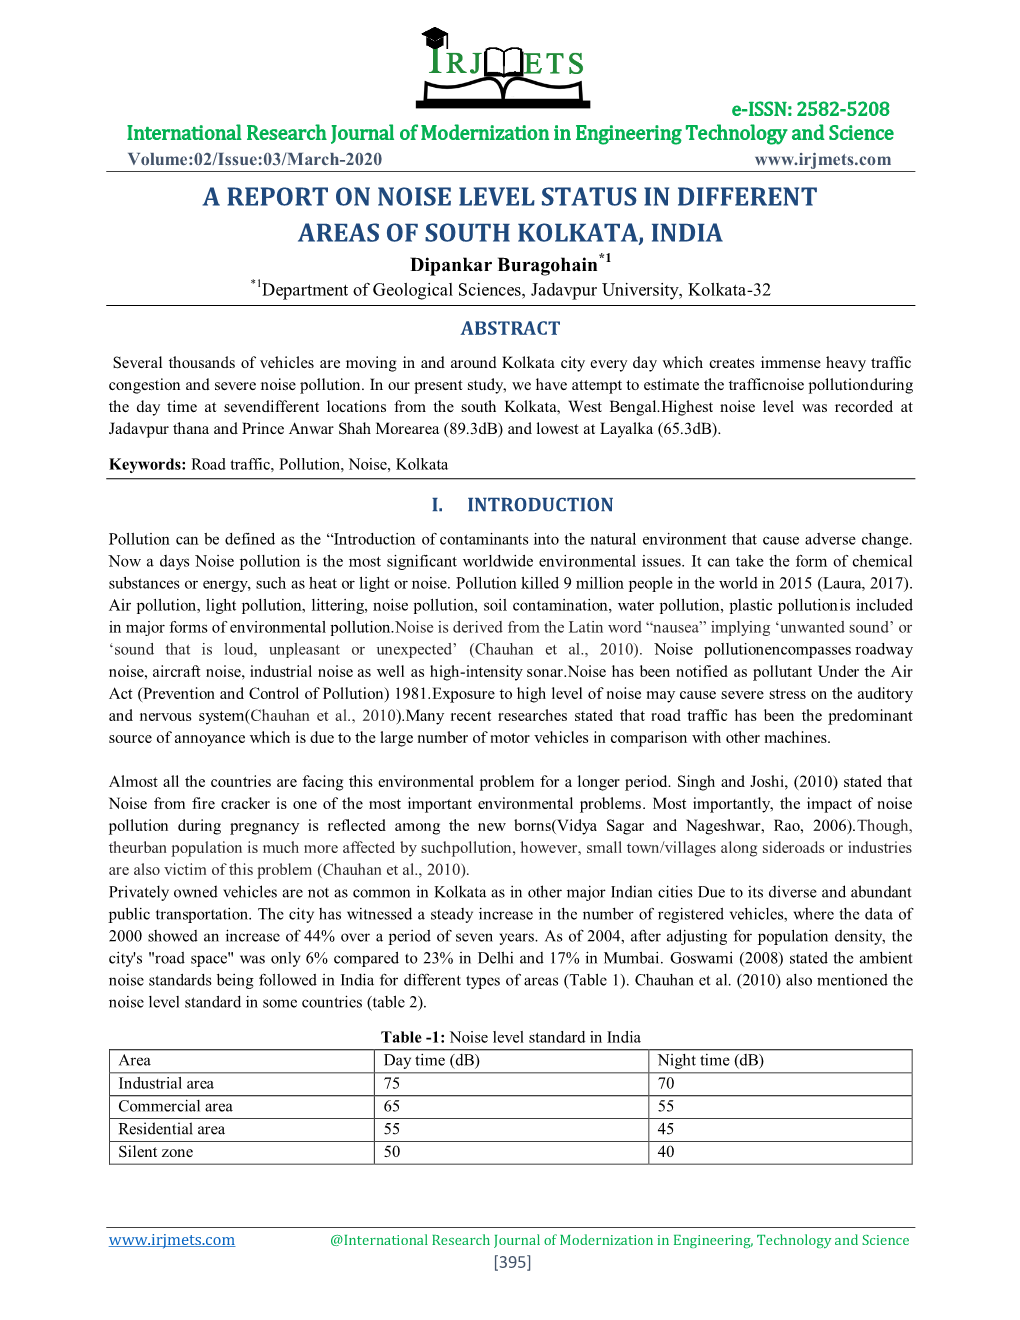 A Report on Noise Level Status in Different Areas Of